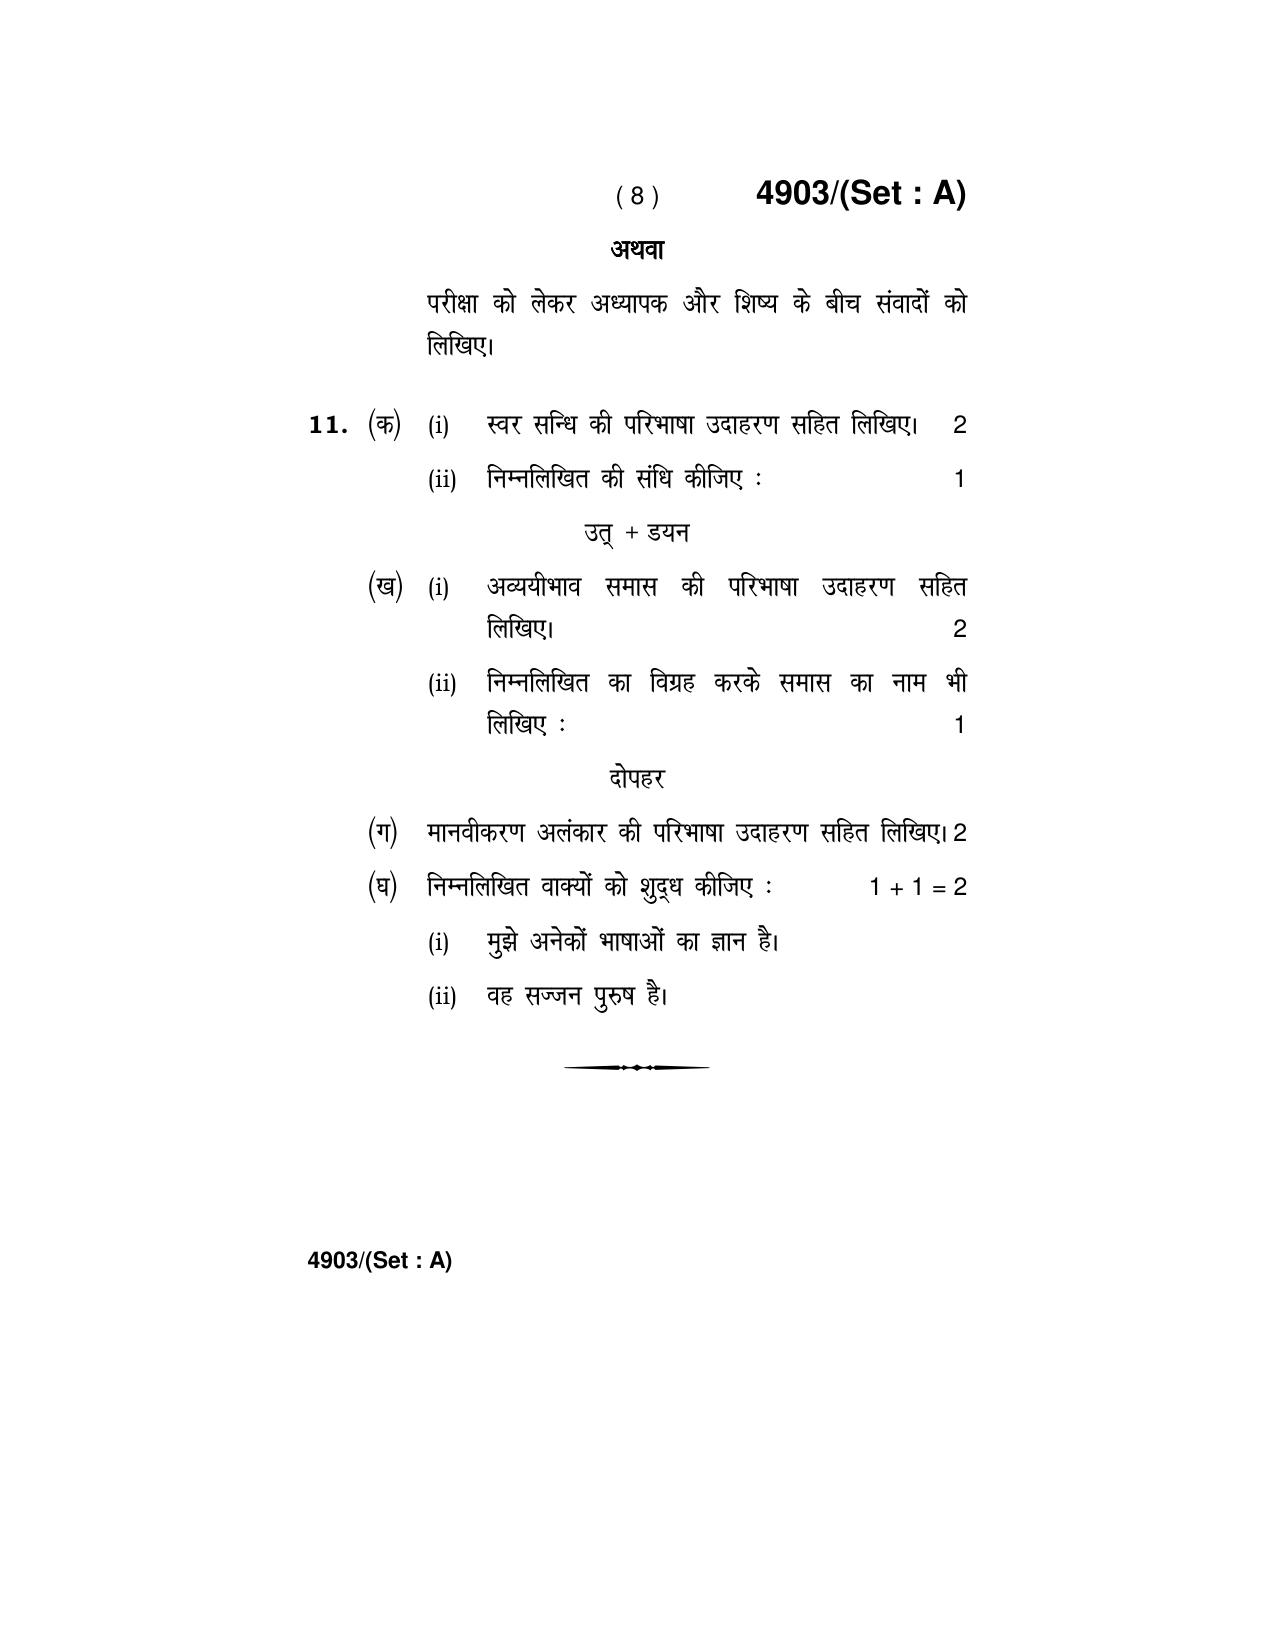 Haryana Board HBSE Class 12 Hindi Core 2020 Question Paper - Page 8